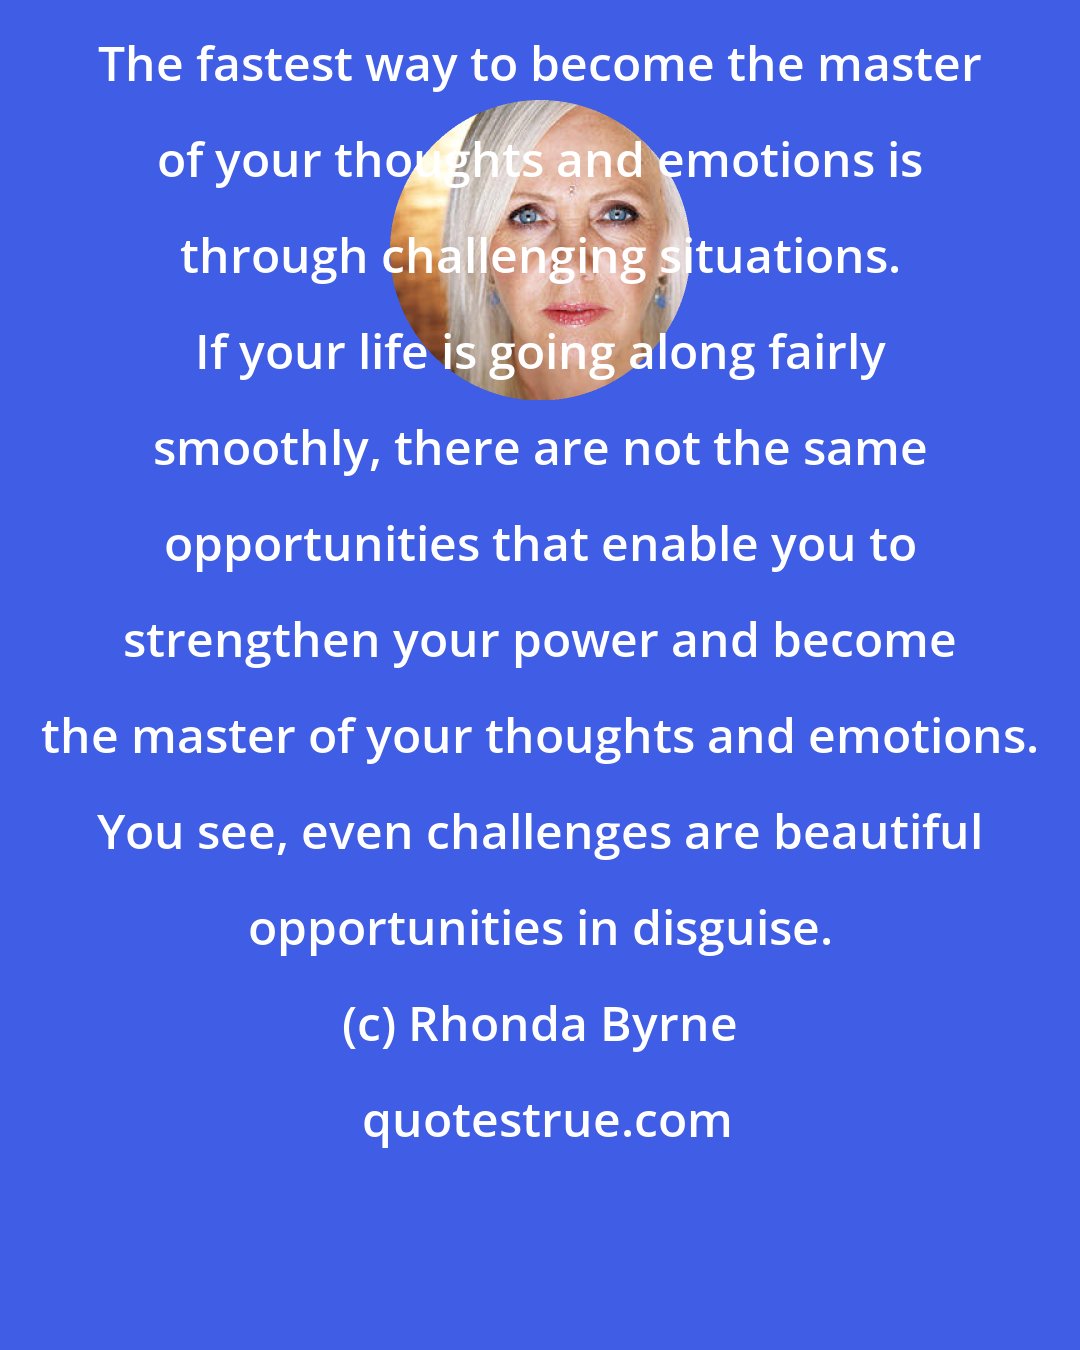 Rhonda Byrne: The fastest way to become the master of your thoughts and emotions is through challenging situations. If your life is going along fairly smoothly, there are not the same opportunities that enable you to strengthen your power and become the master of your thoughts and emotions. You see, even challenges are beautiful opportunities in disguise.